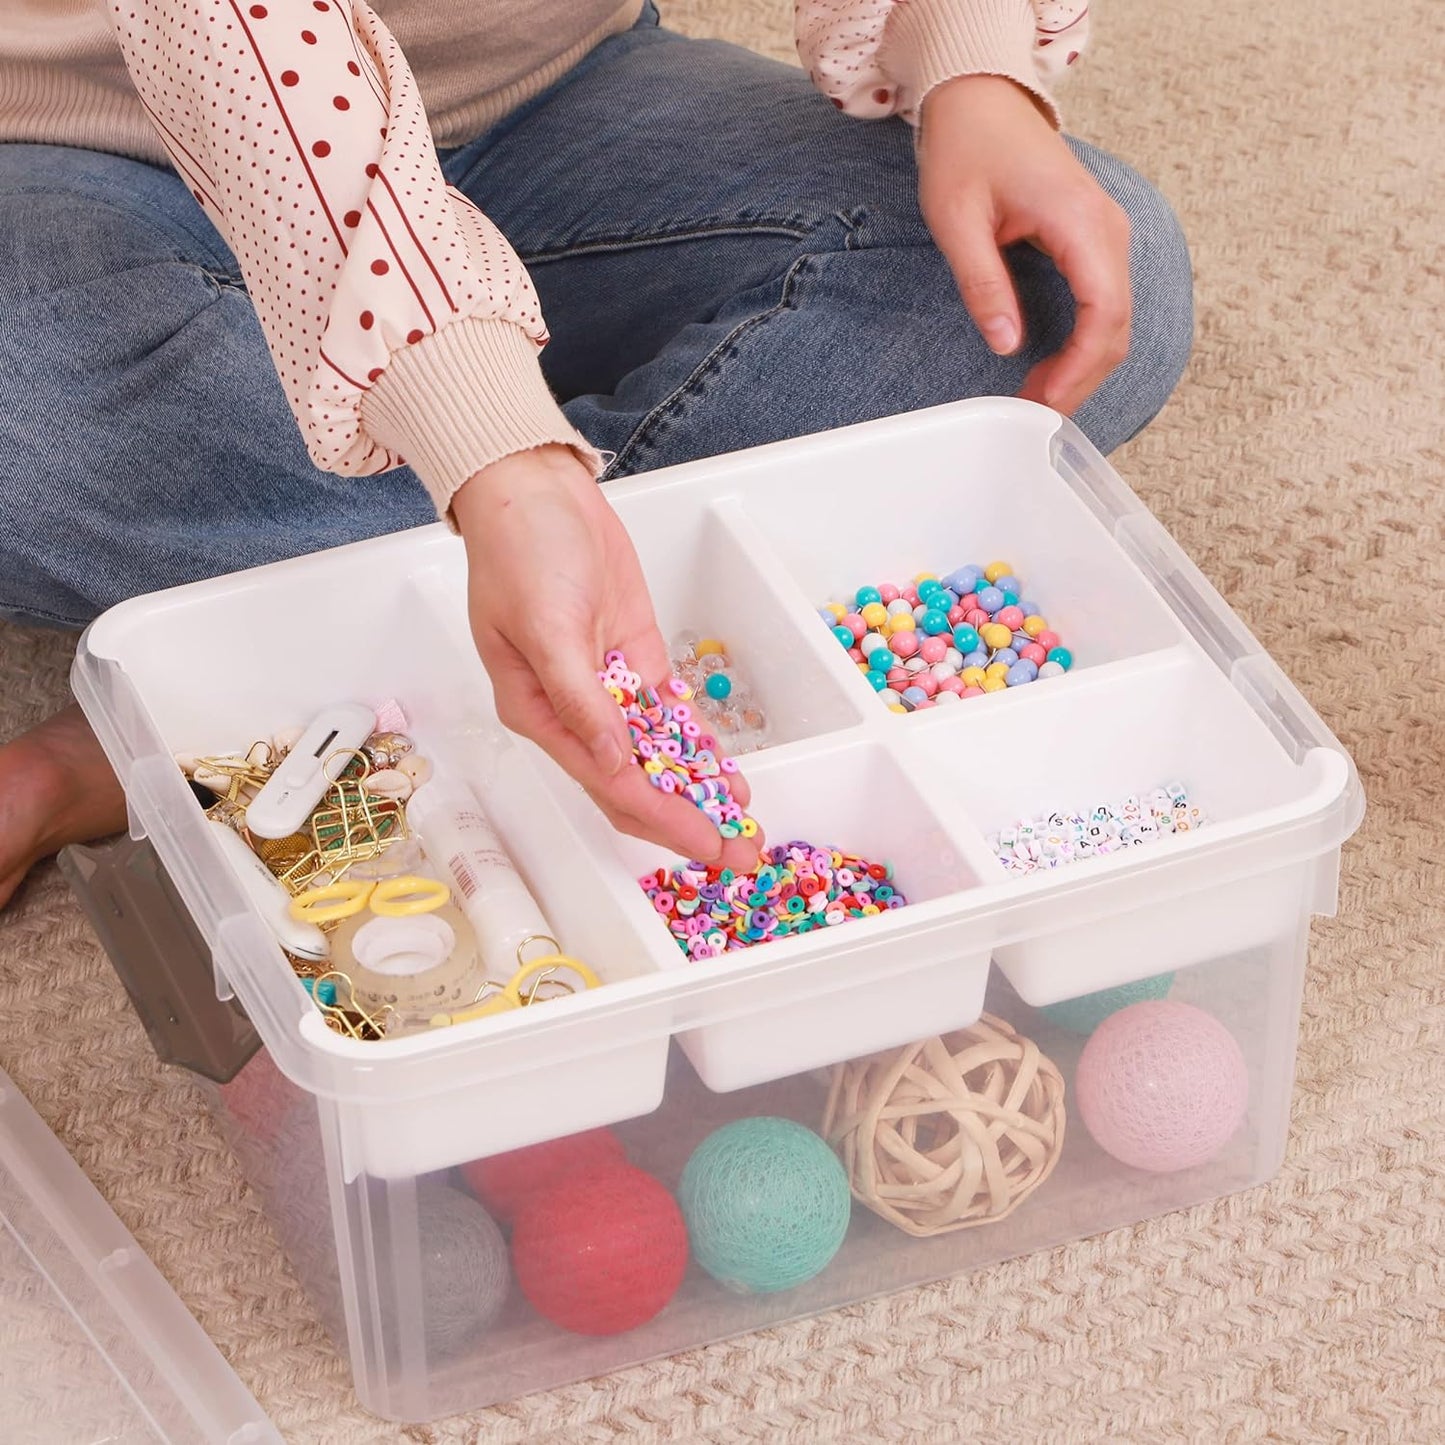 Citylife 17 QT Plastic Storage Box with Removable Tray Craft Organizers and Storage Clear Storage Container for Organizing Bead, Tool, Sewing, Playdoh